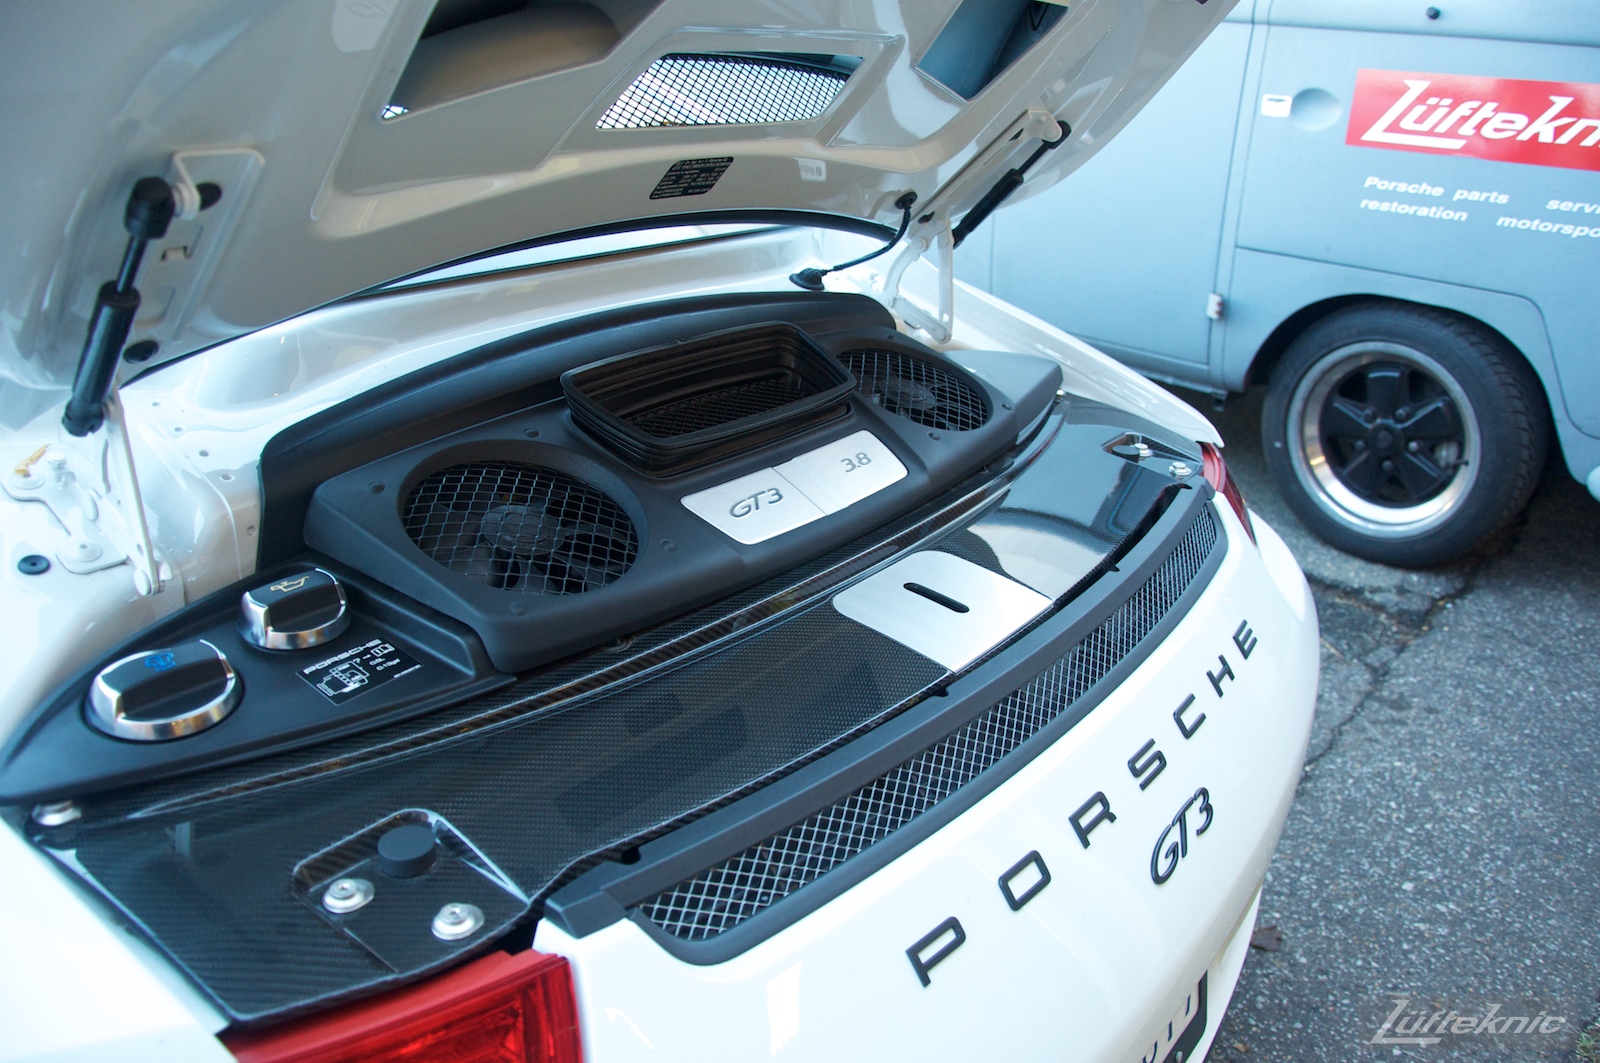 An open rear engine cover just shows fans and fluid caps on the Lüfteknic Porsche 991 GT3